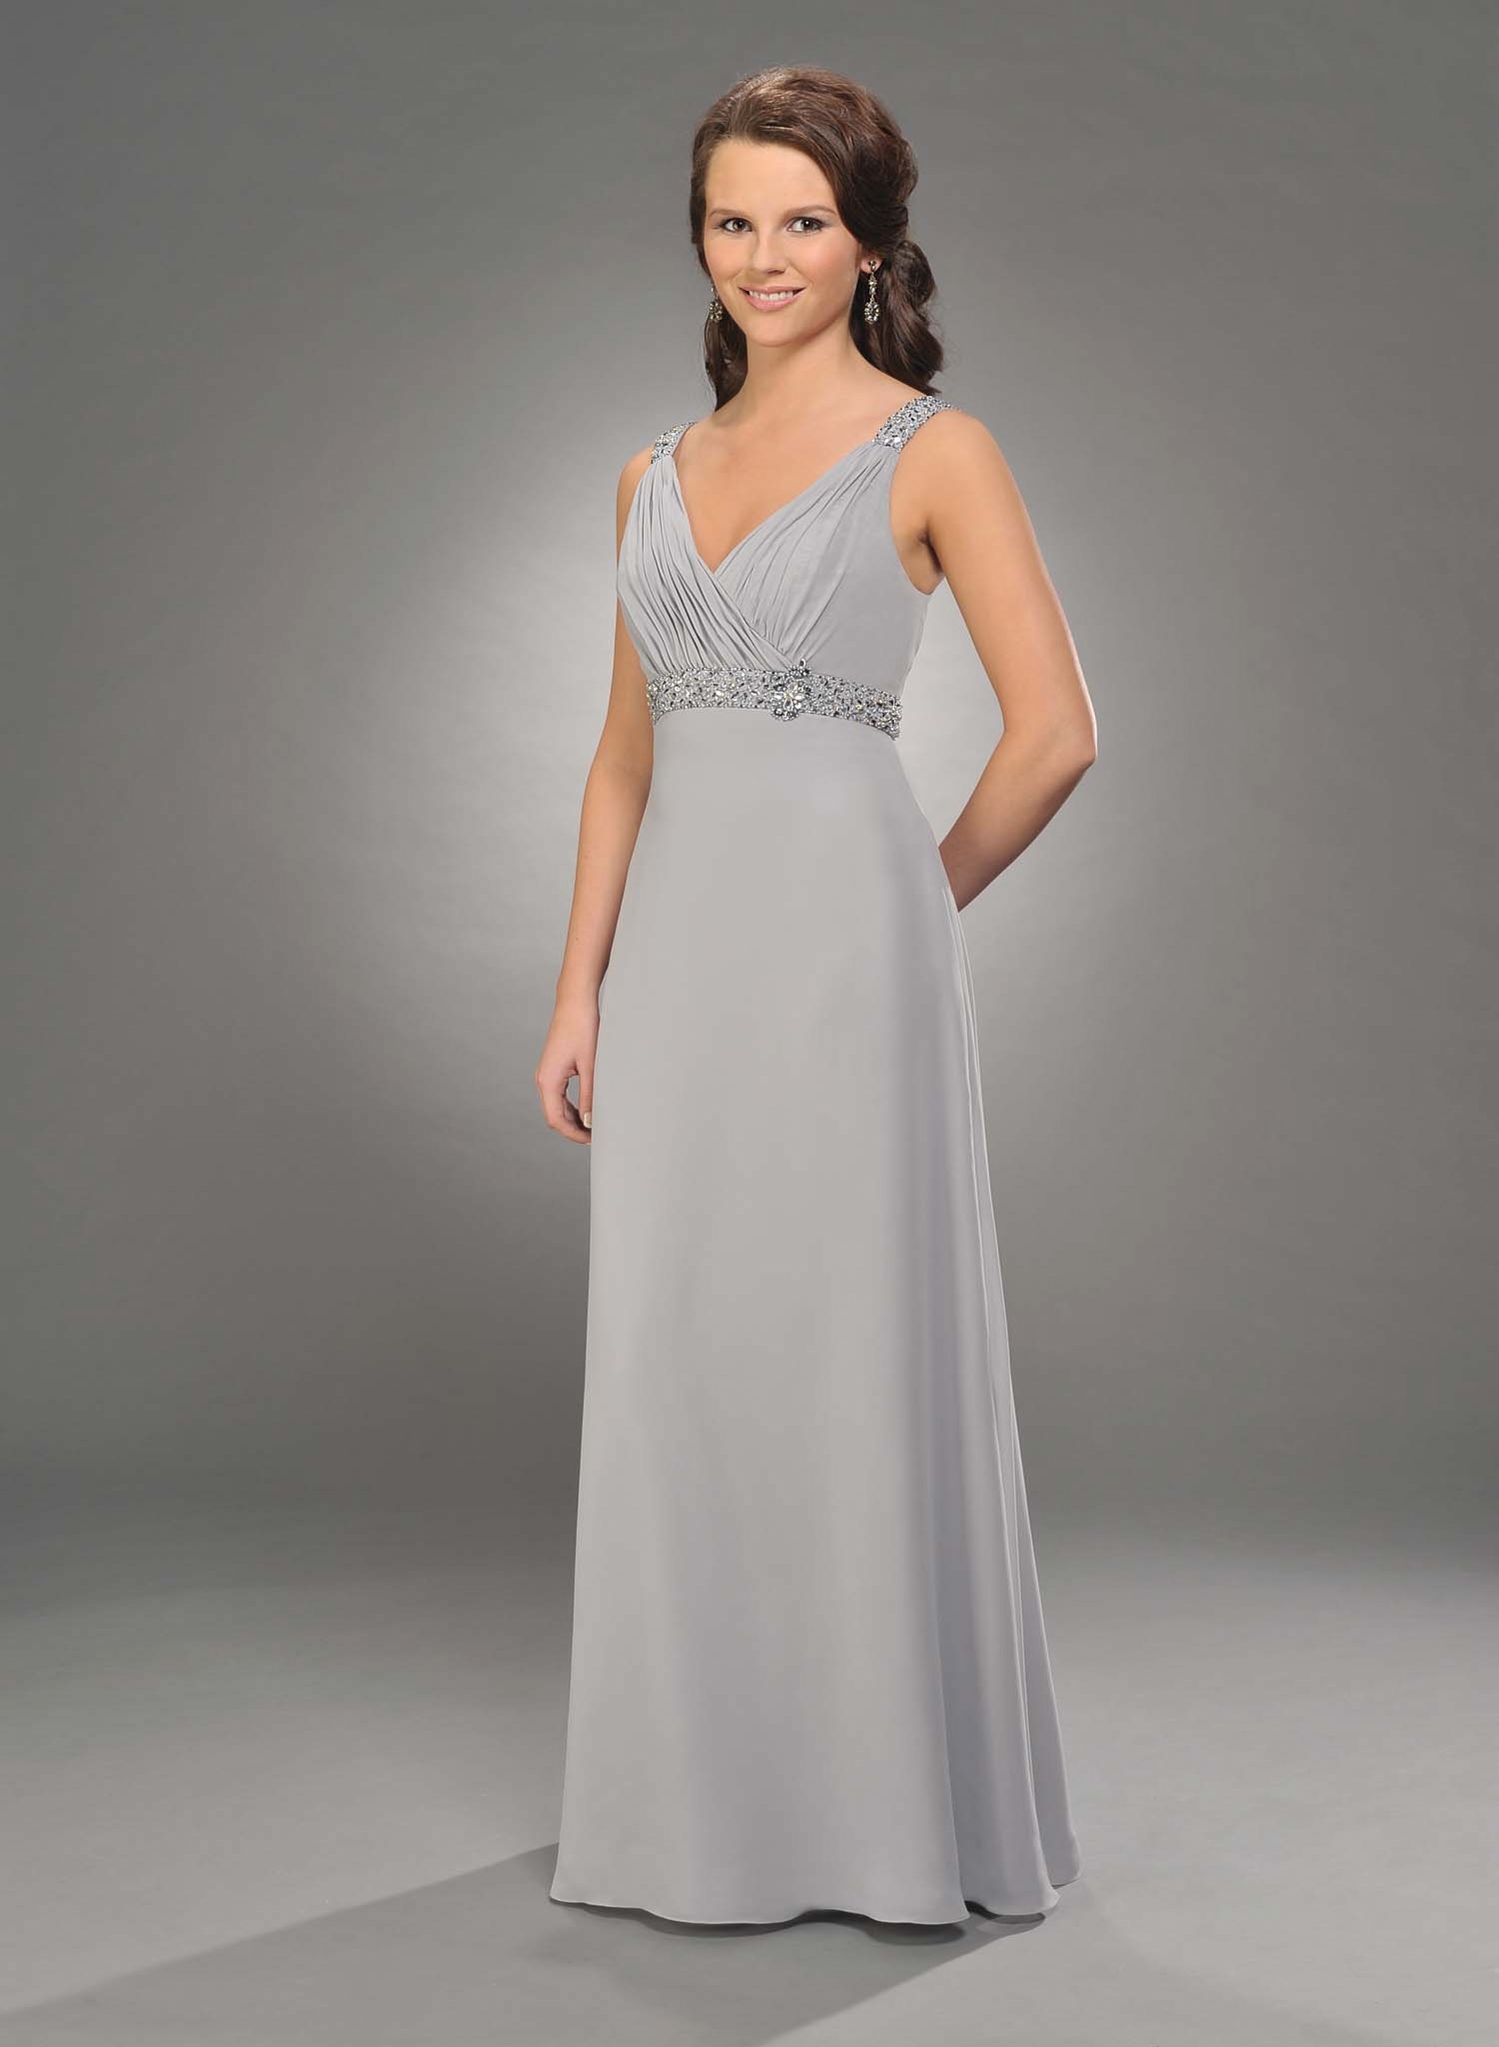 Silver Empire V Neck And Strap Low Back Full Length Chiffon Prom Dresses With Beading And Drapes 